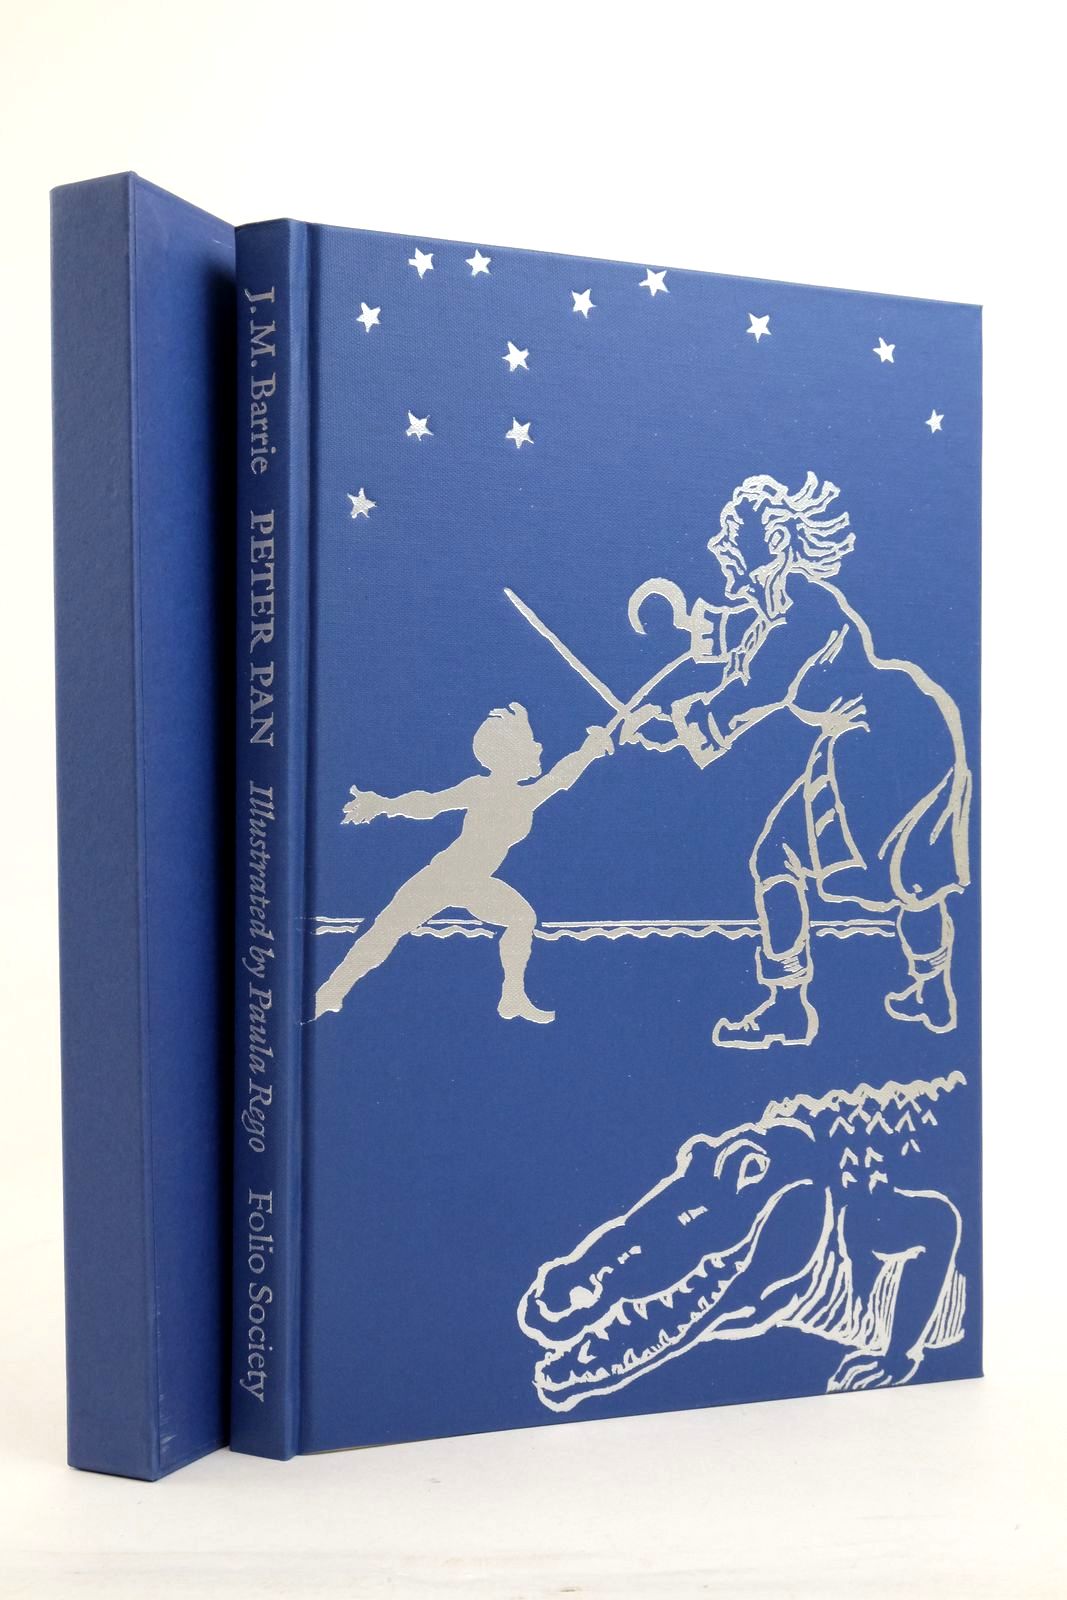 Photo of PETER PAN OR THE BOY WHO WOULD NOT GROW UP written by Barrie, J.M.
Birkin, Andrew illustrated by Rego, Paula published by Folio Society (STOCK CODE: 2138256)  for sale by Stella & Rose's Books